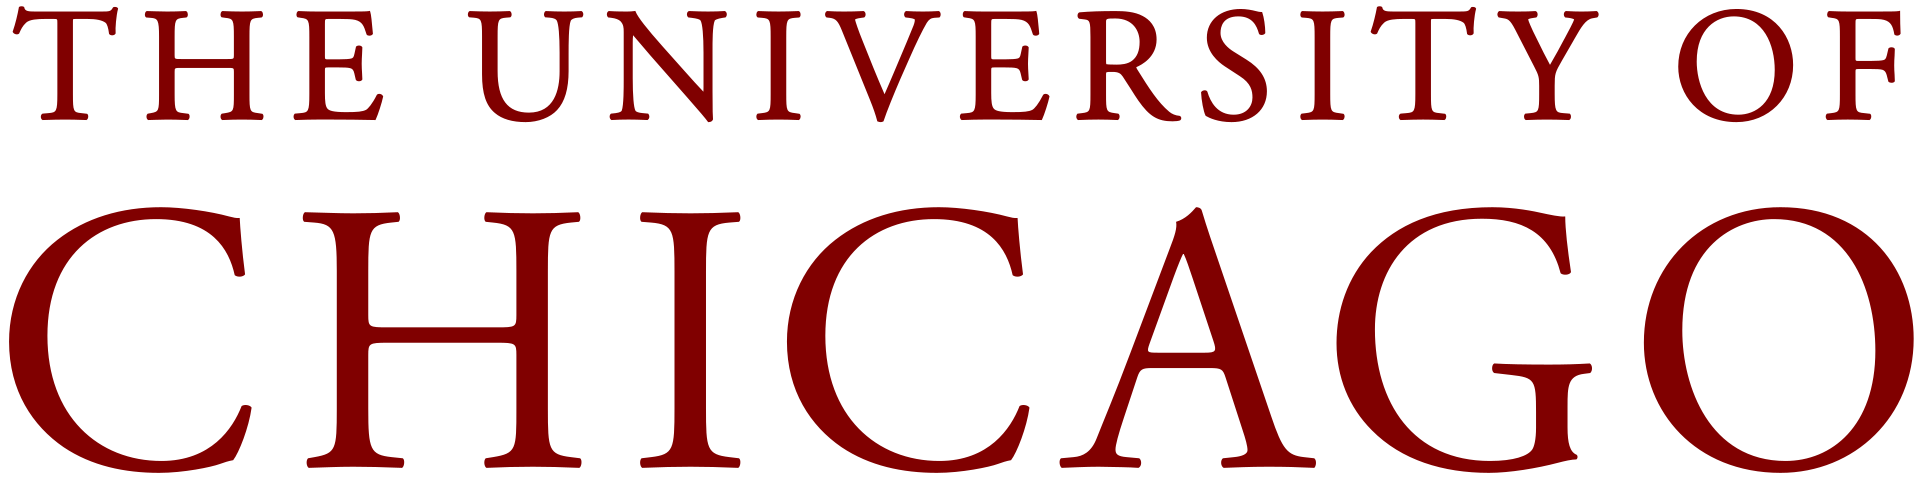 University of Chicago logo, By University of Chicago - http://communications.uchicago.edu/sites/all/files/communications/identity/uchicago.identity.guidelines.pdf, Public Domain, http://commons.wikimedia.org/w/index.php?curid=66222713"